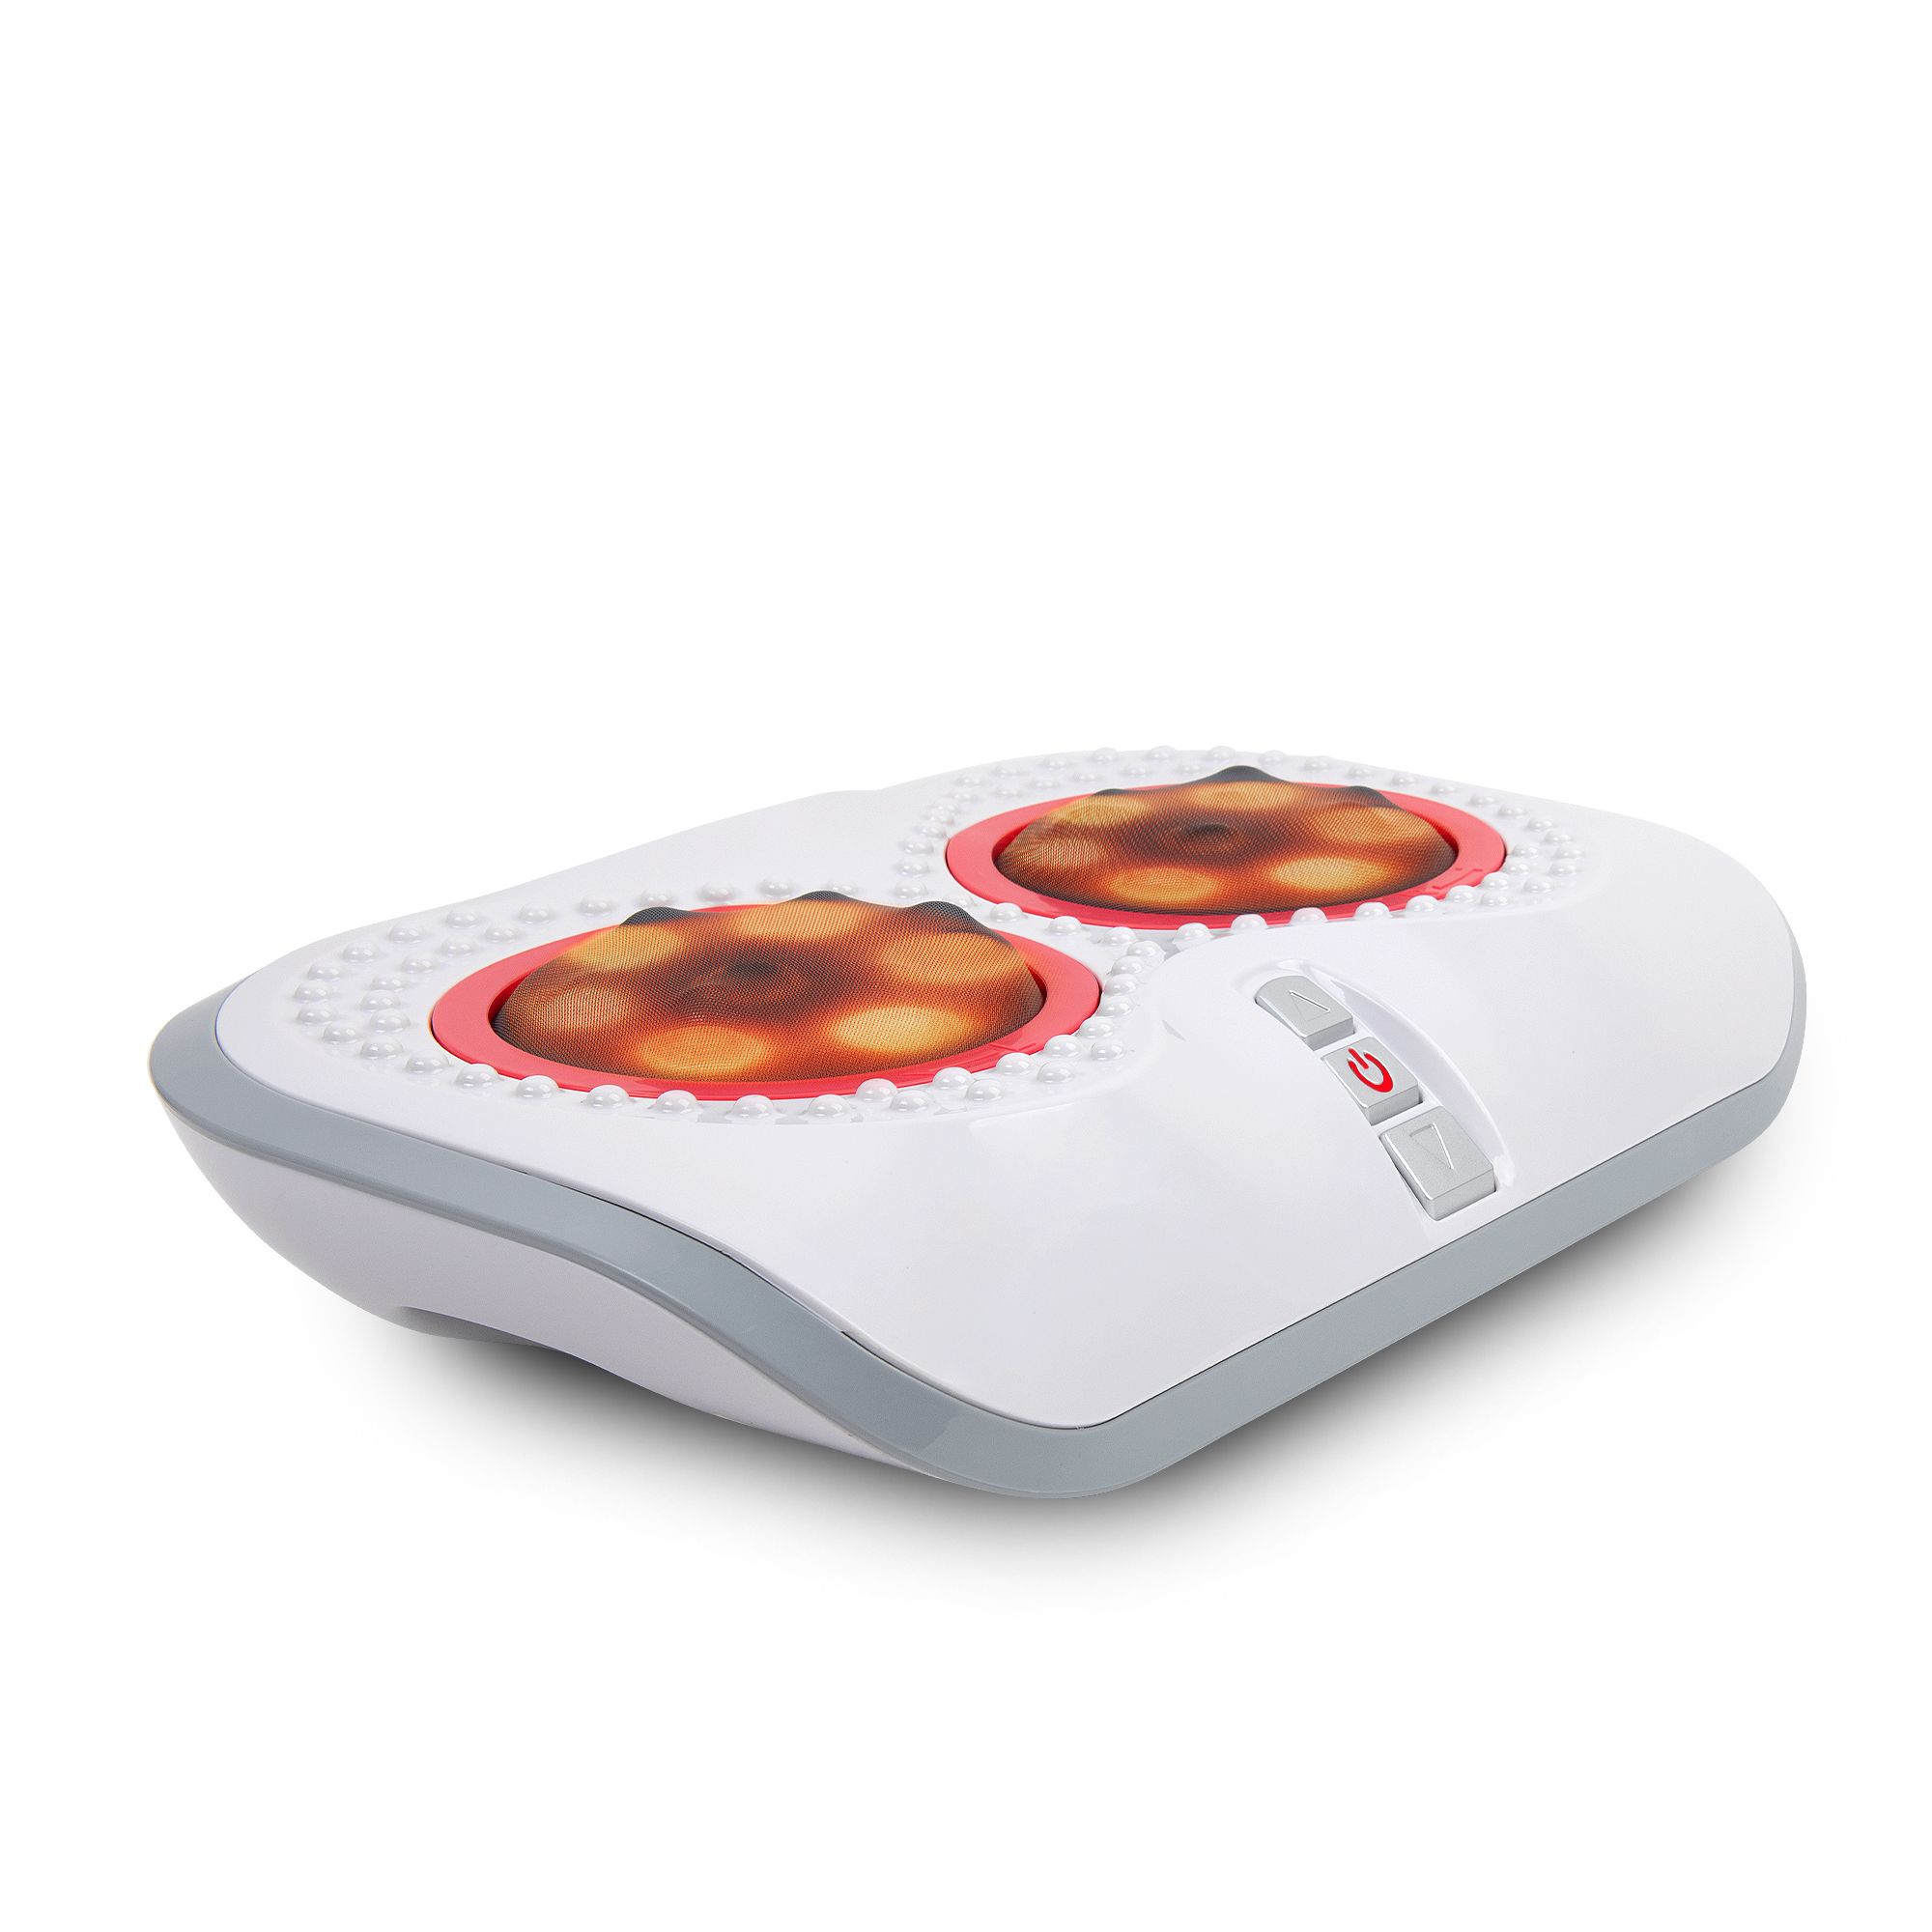 Turbo-logy 3d Rolling Massager With Heated Therapy